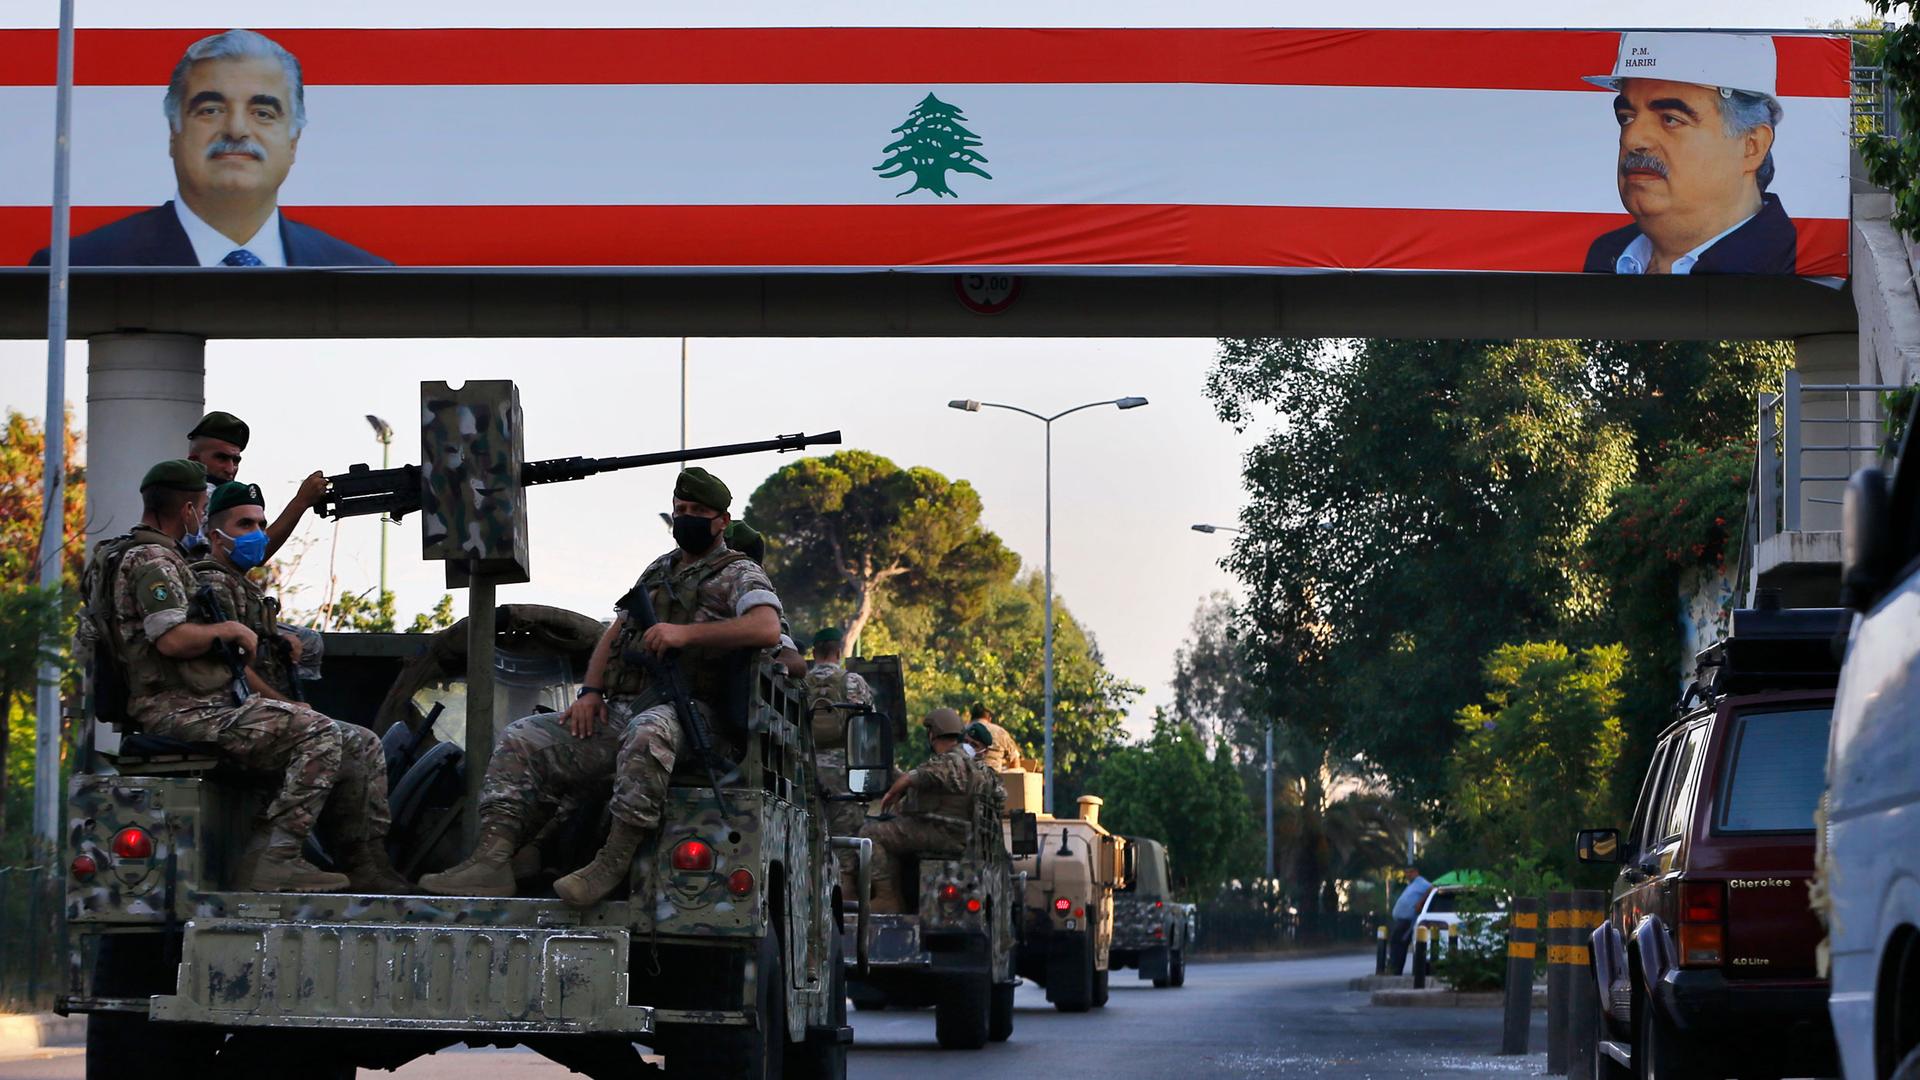 A convoy of military vehicles, some equipped with weapons, pass under a large Lebanese flag with pictures of slain Lebanese Prime Minister Rafik Hariri.